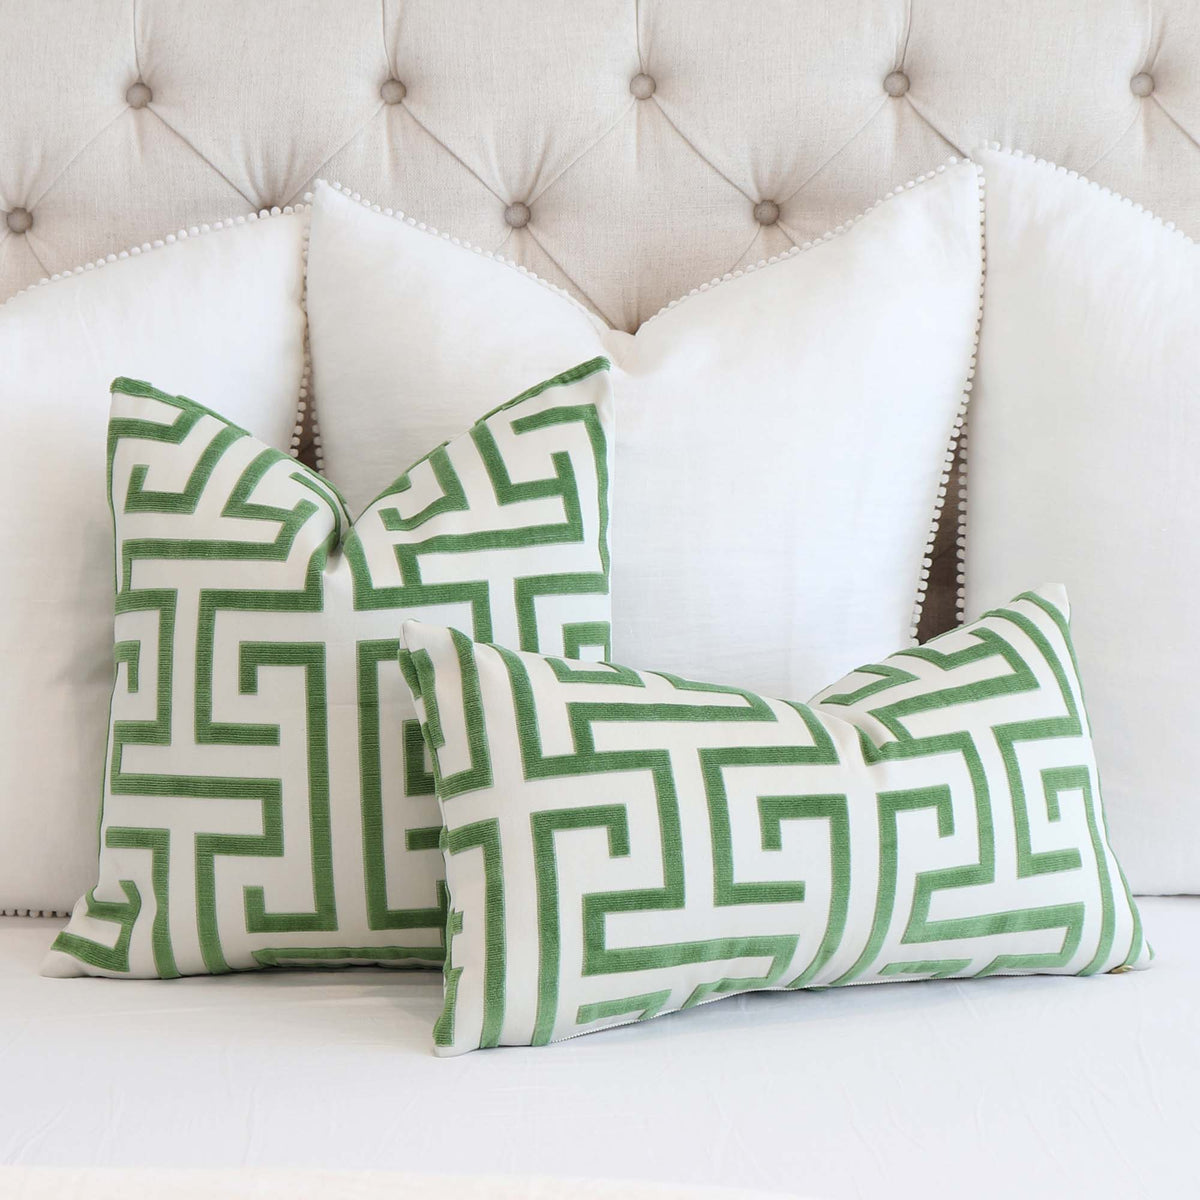 Modern Throw Pillows | Ethically Made Throw Pillows | Anchal Project